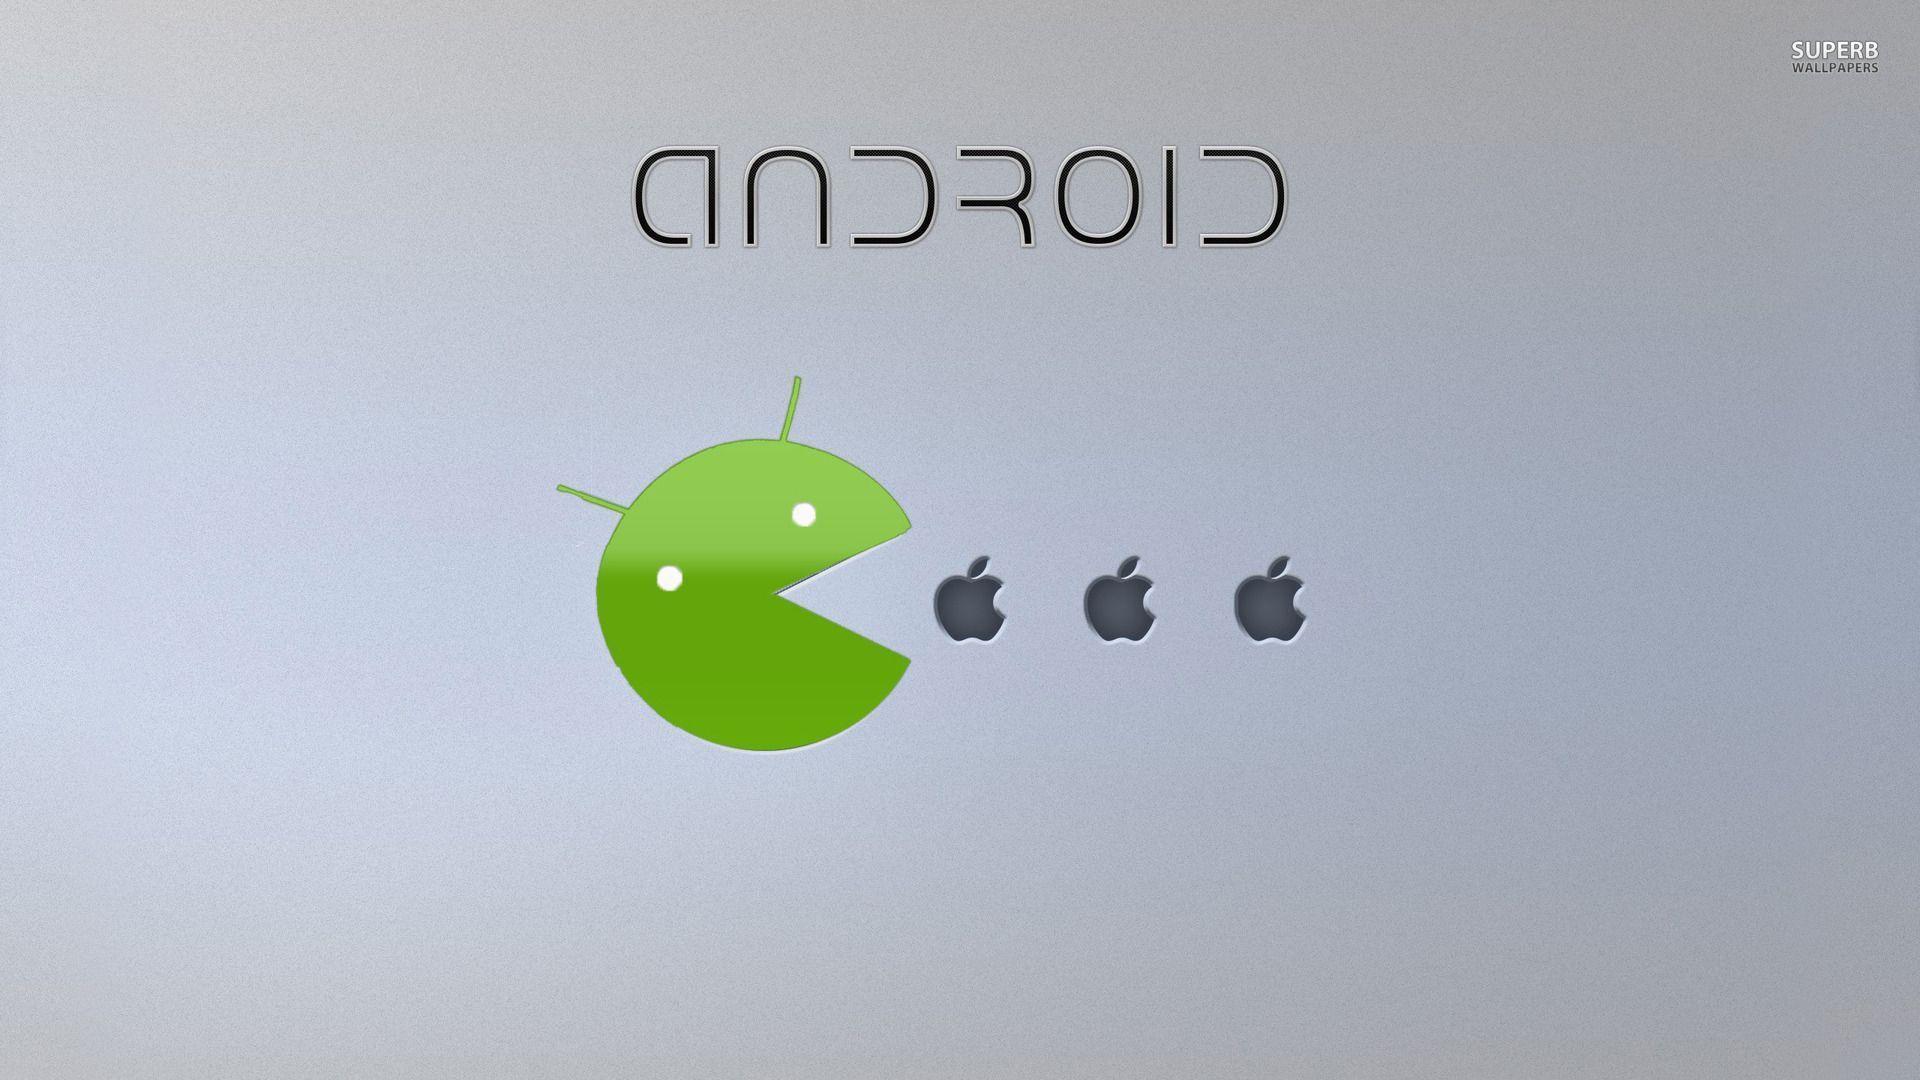 Android and Apple wallpaper wallpaper - #